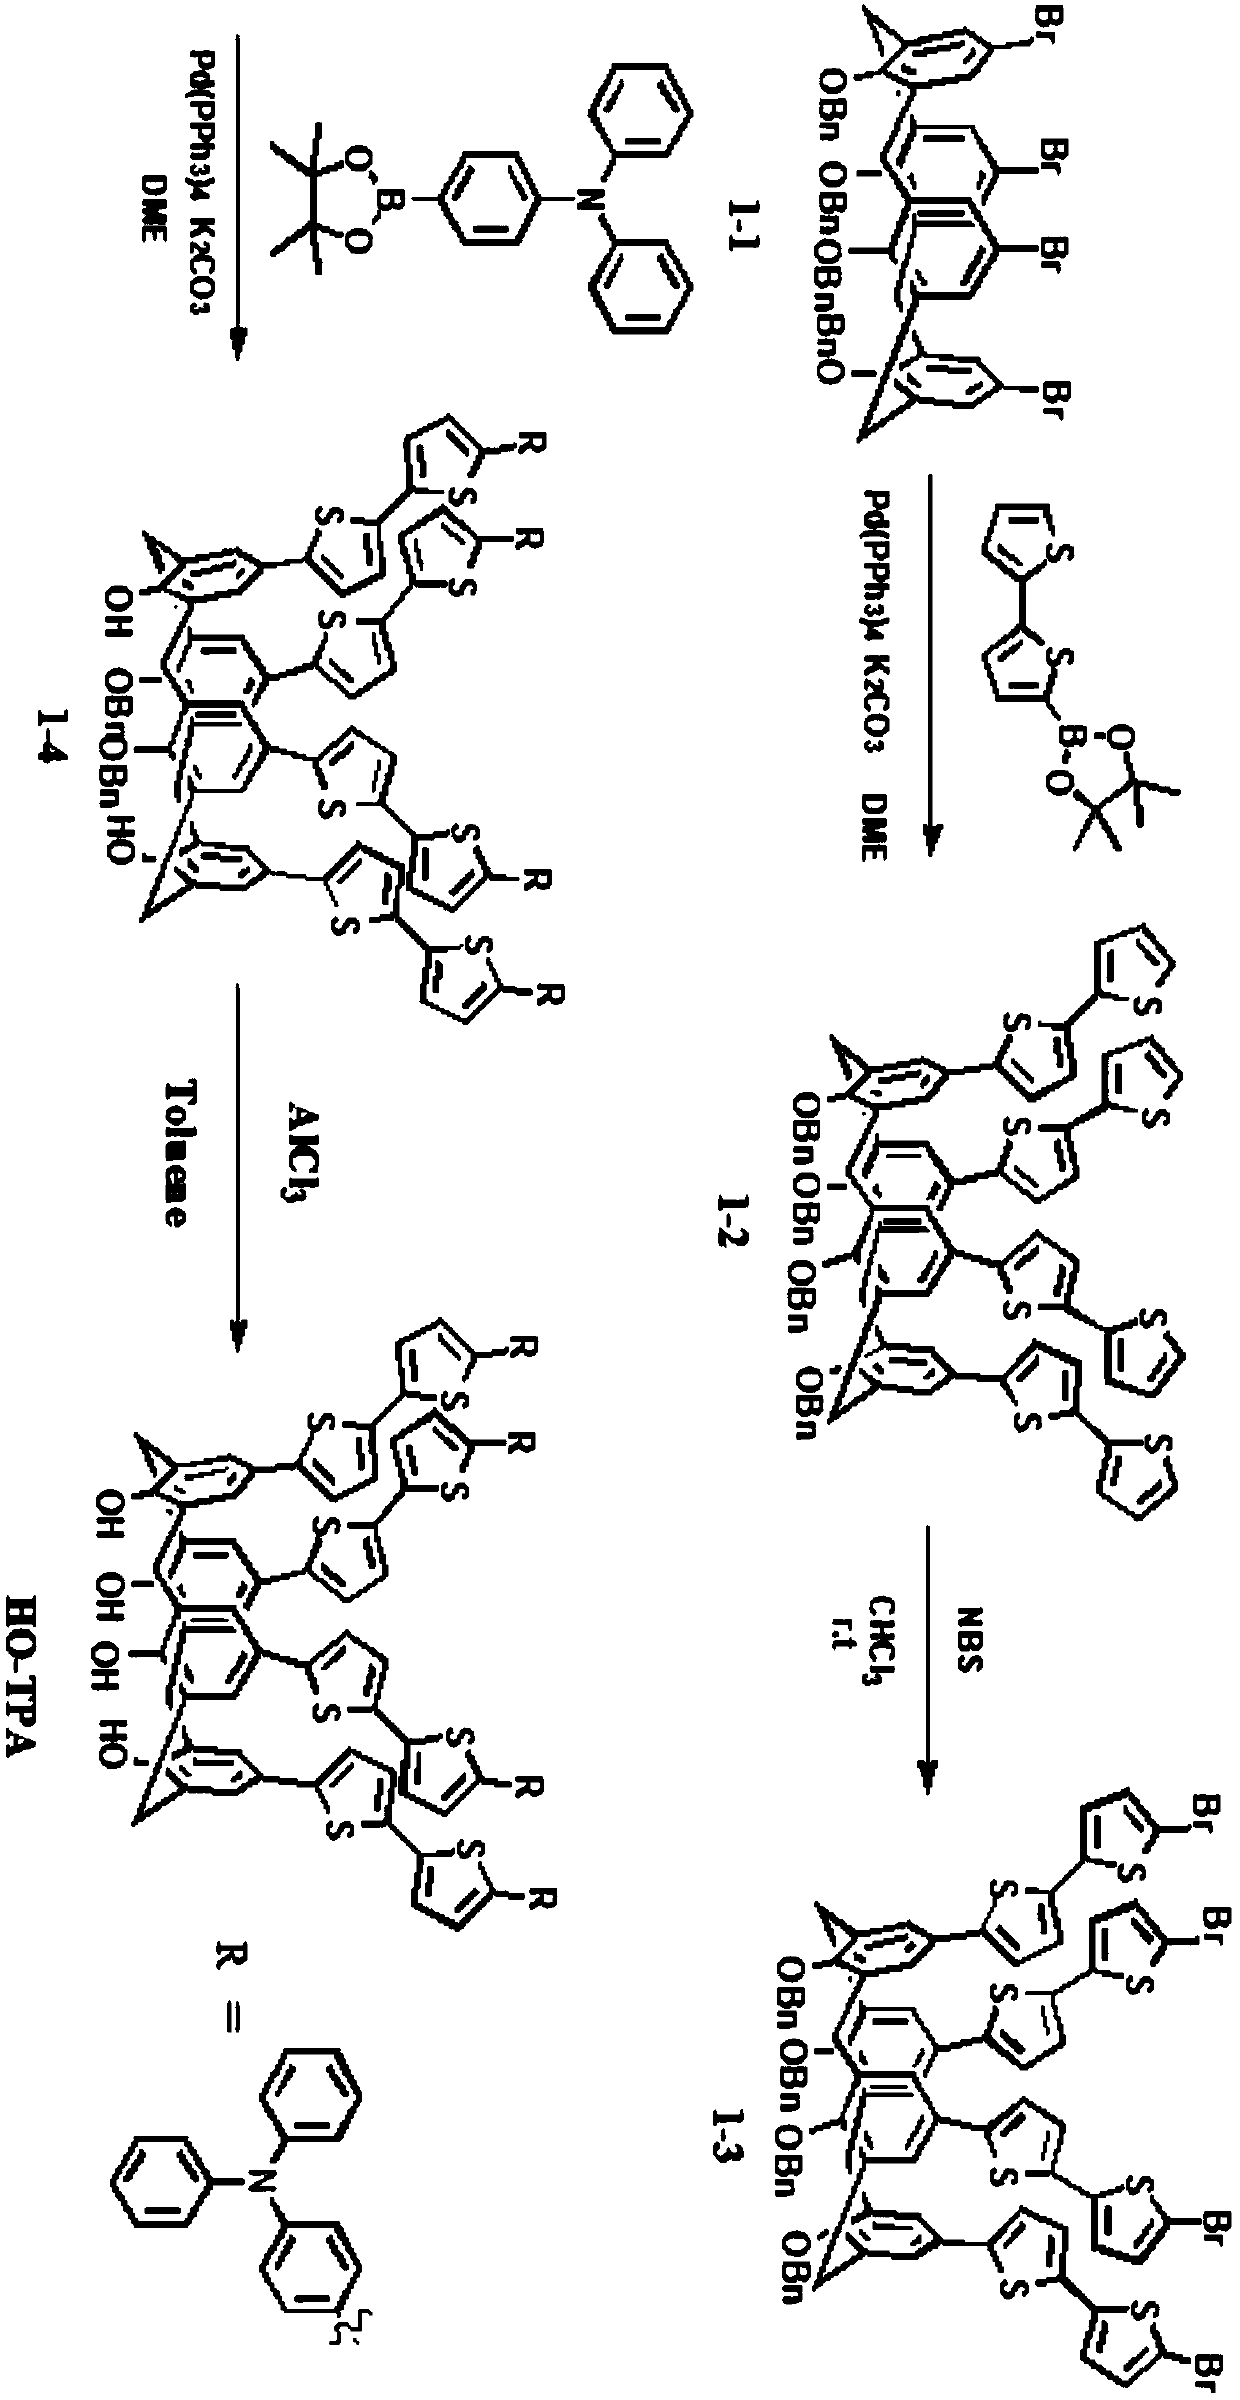 Hybrid material based on macrocyclic compound photosensitive dye and titanium dioxide and preparation method thereof, and application of hybrid material to photocatalysis